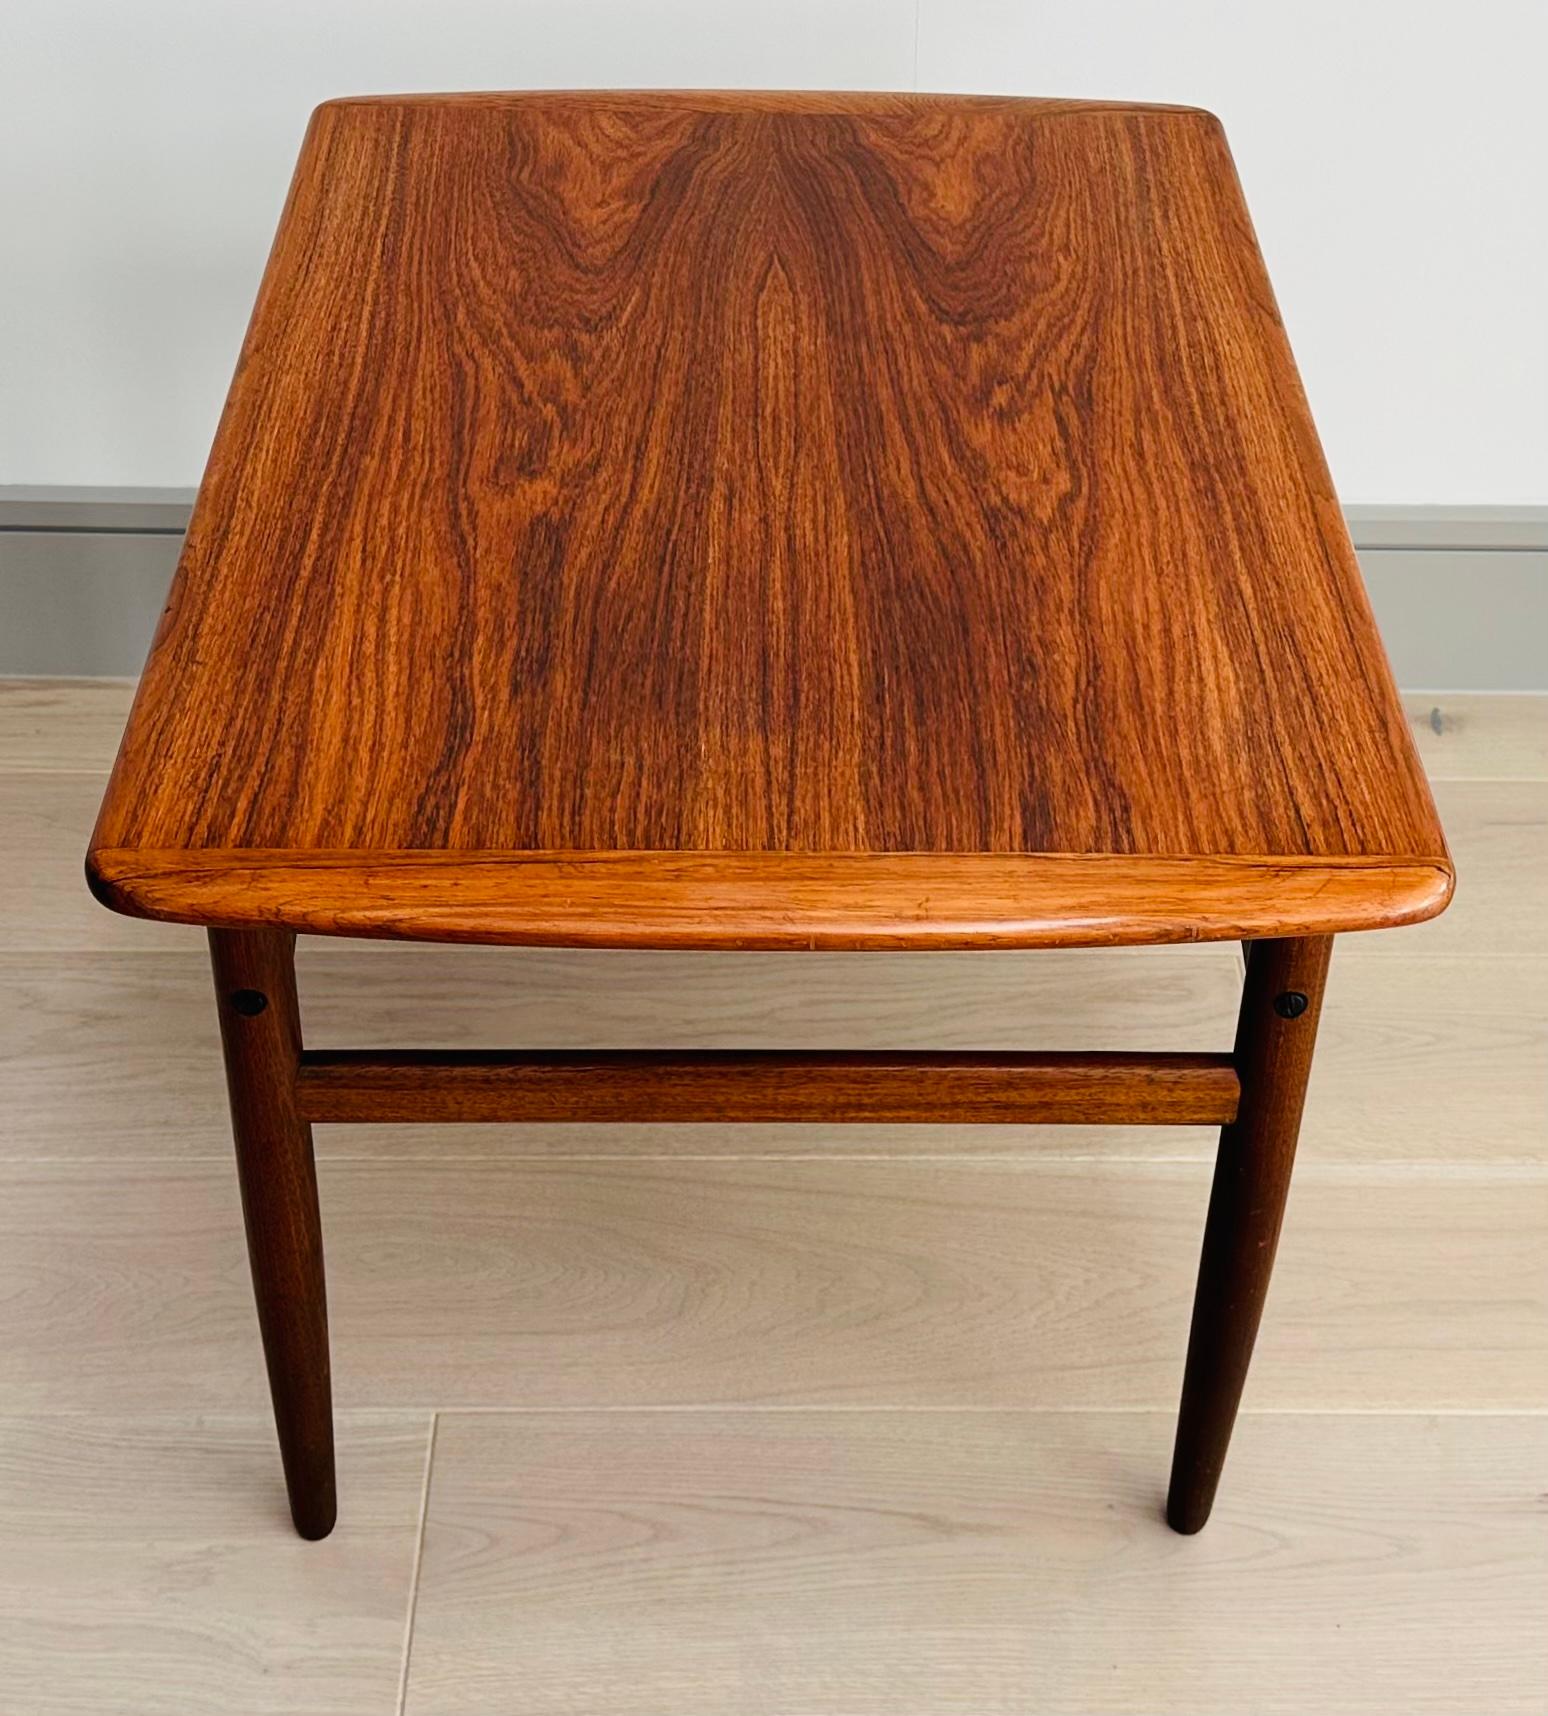 1960s Danish Arrebo Møbler Rosewood Side or Coffee Table by Robert Christensen For Sale 5